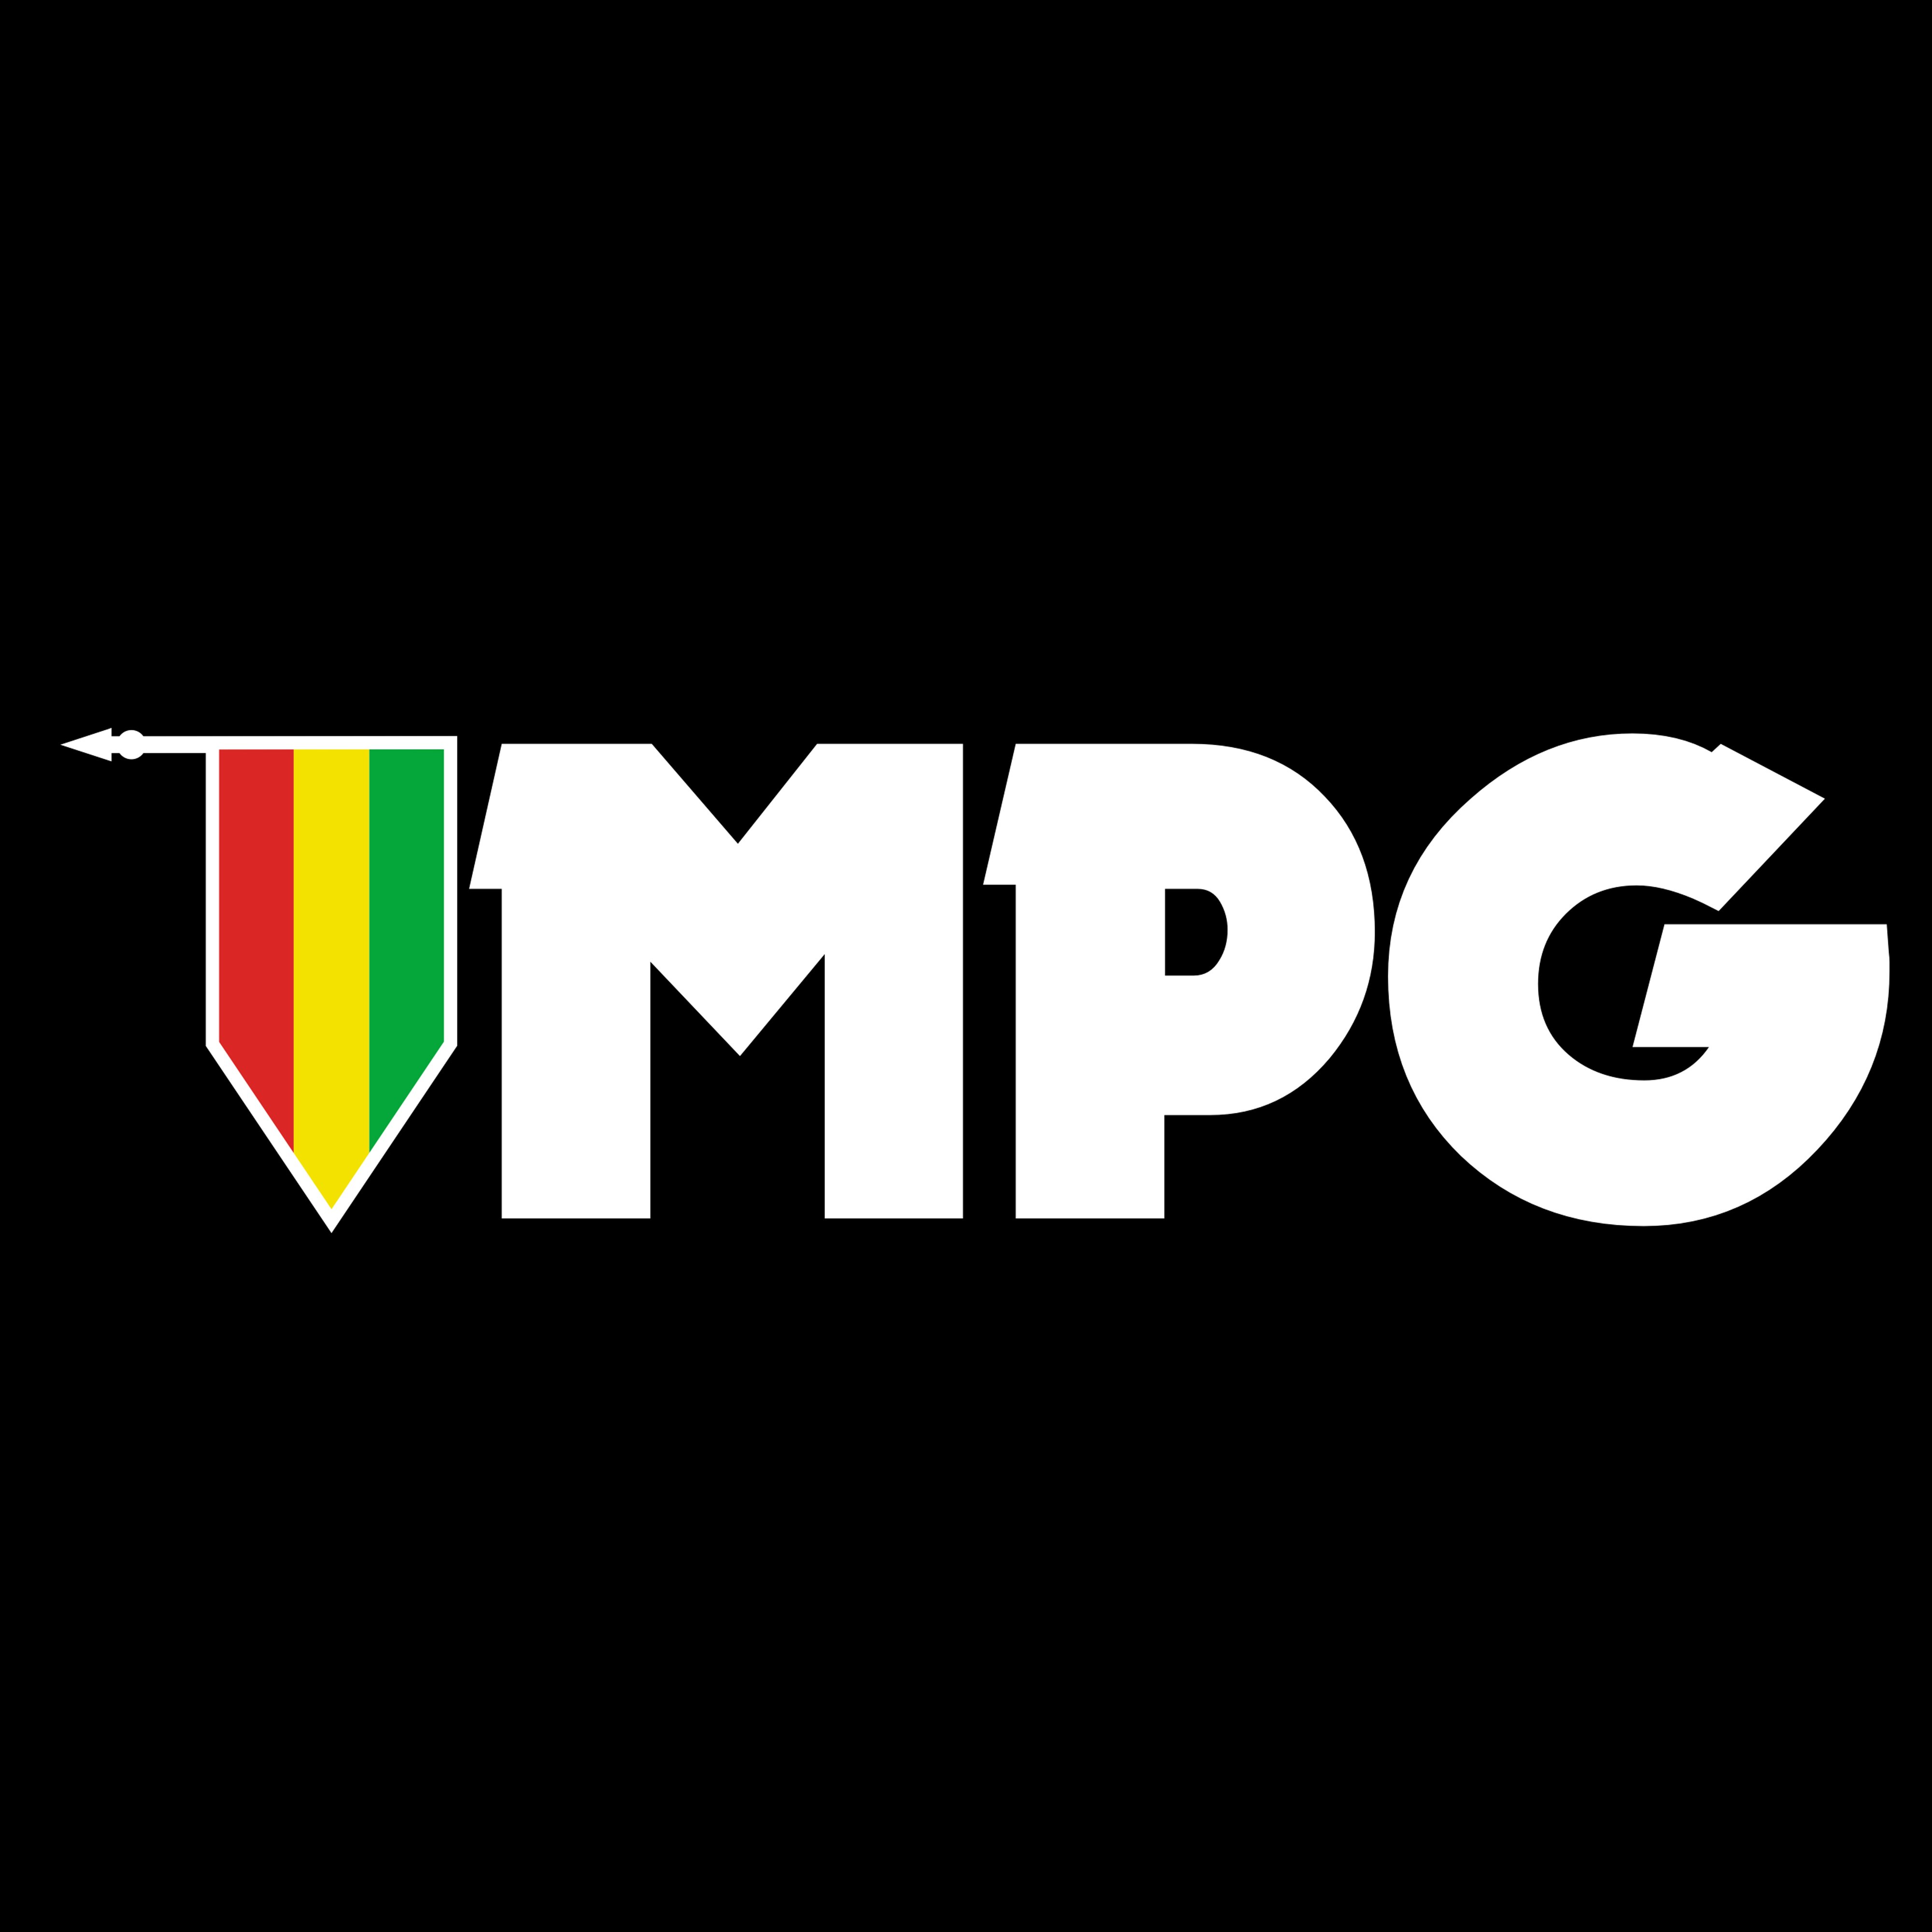 the official twitter of MPG Band (Most People of Gentleman)
|| Roots • Rock • Reggae
|| Info :
mpgband20@gmail.com
/ 089627229782